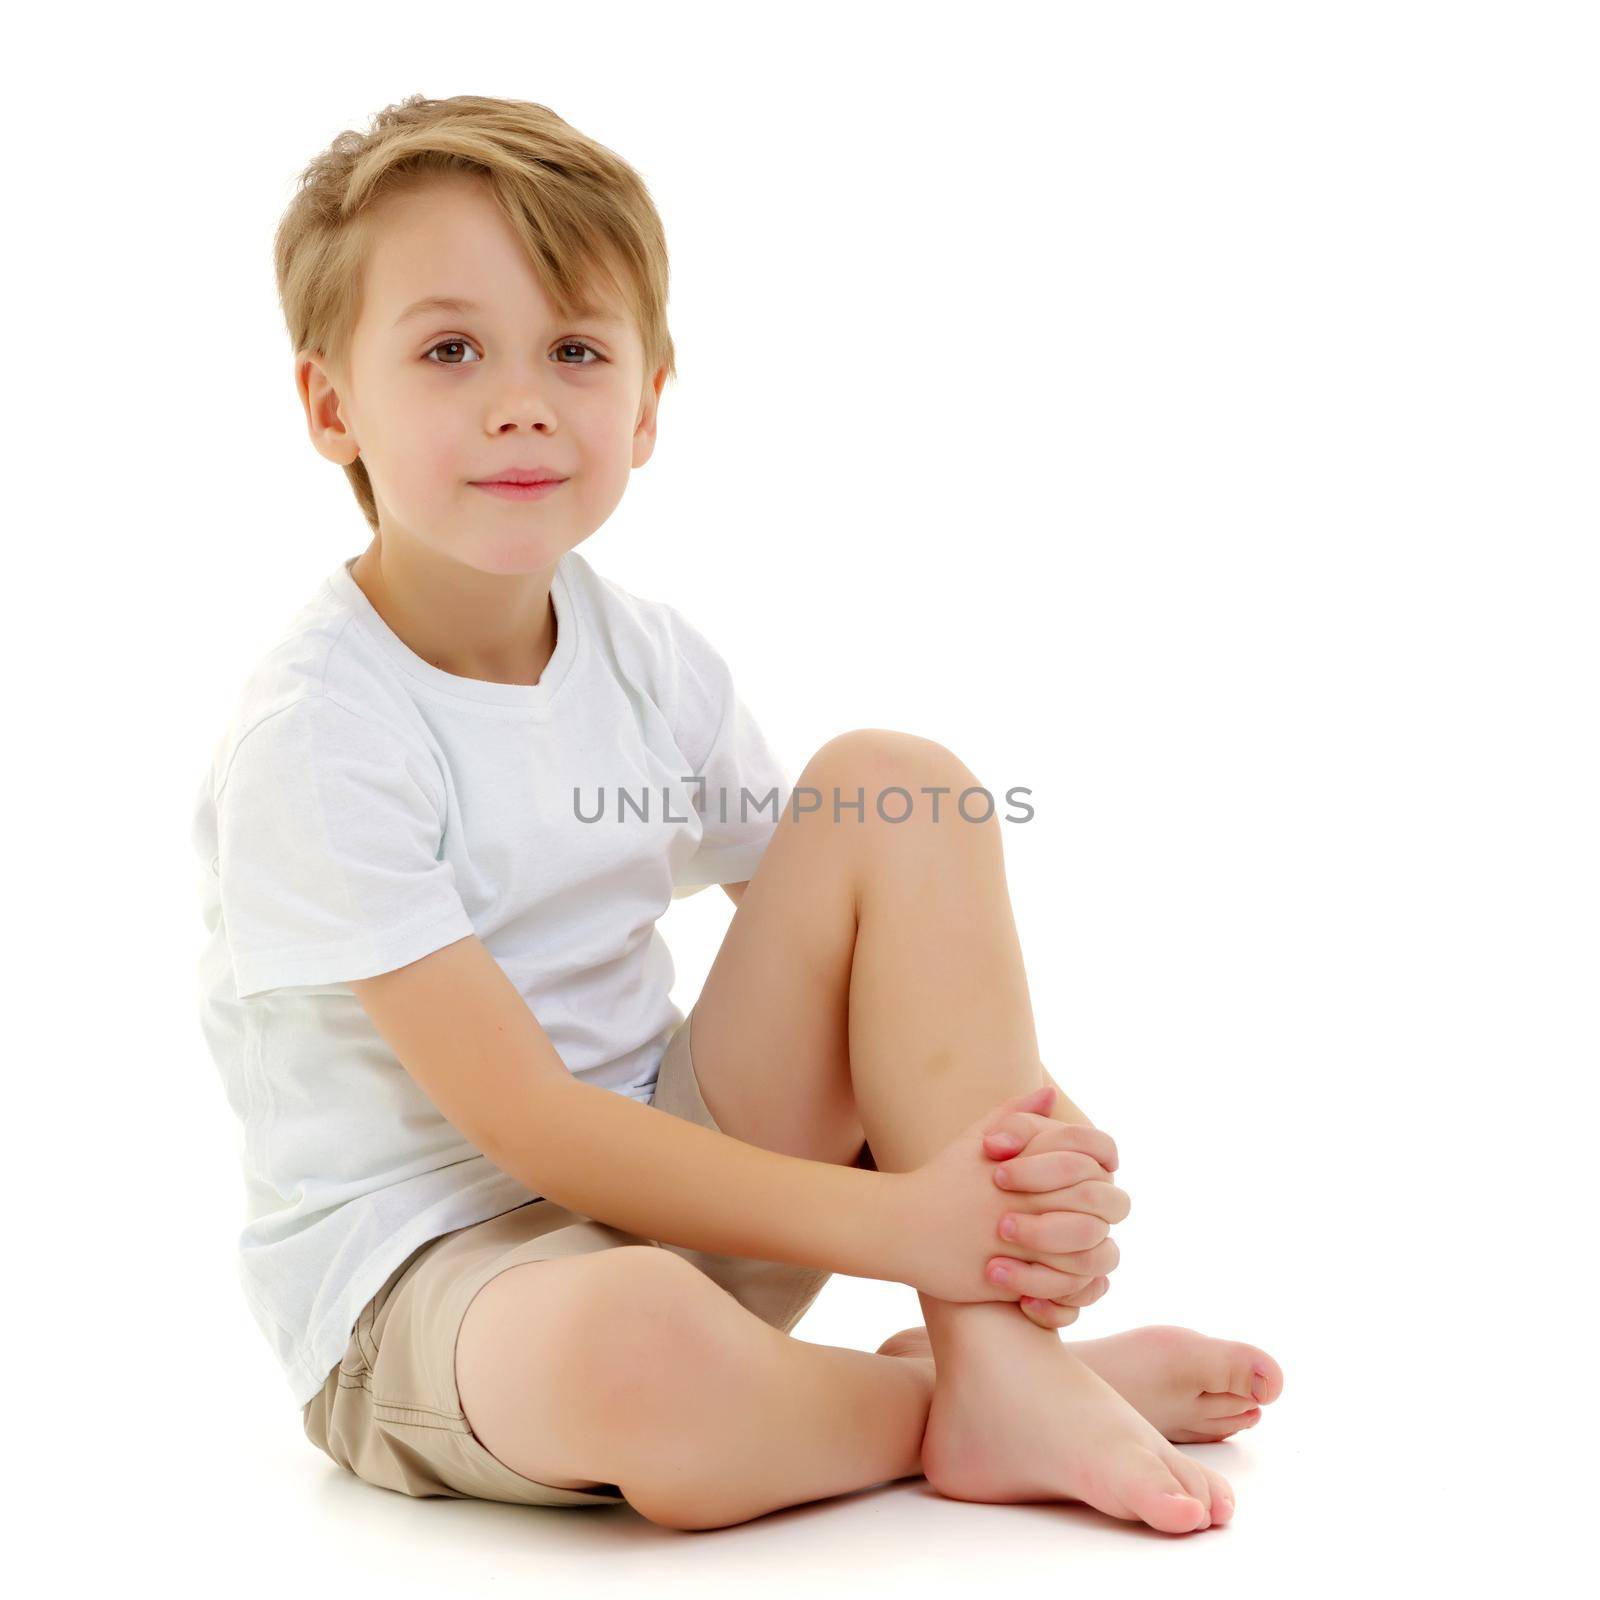 A sad little boy in a pure white T-shirt on the surface of which you can make a drawing or write advertising text. Isolated on white background.